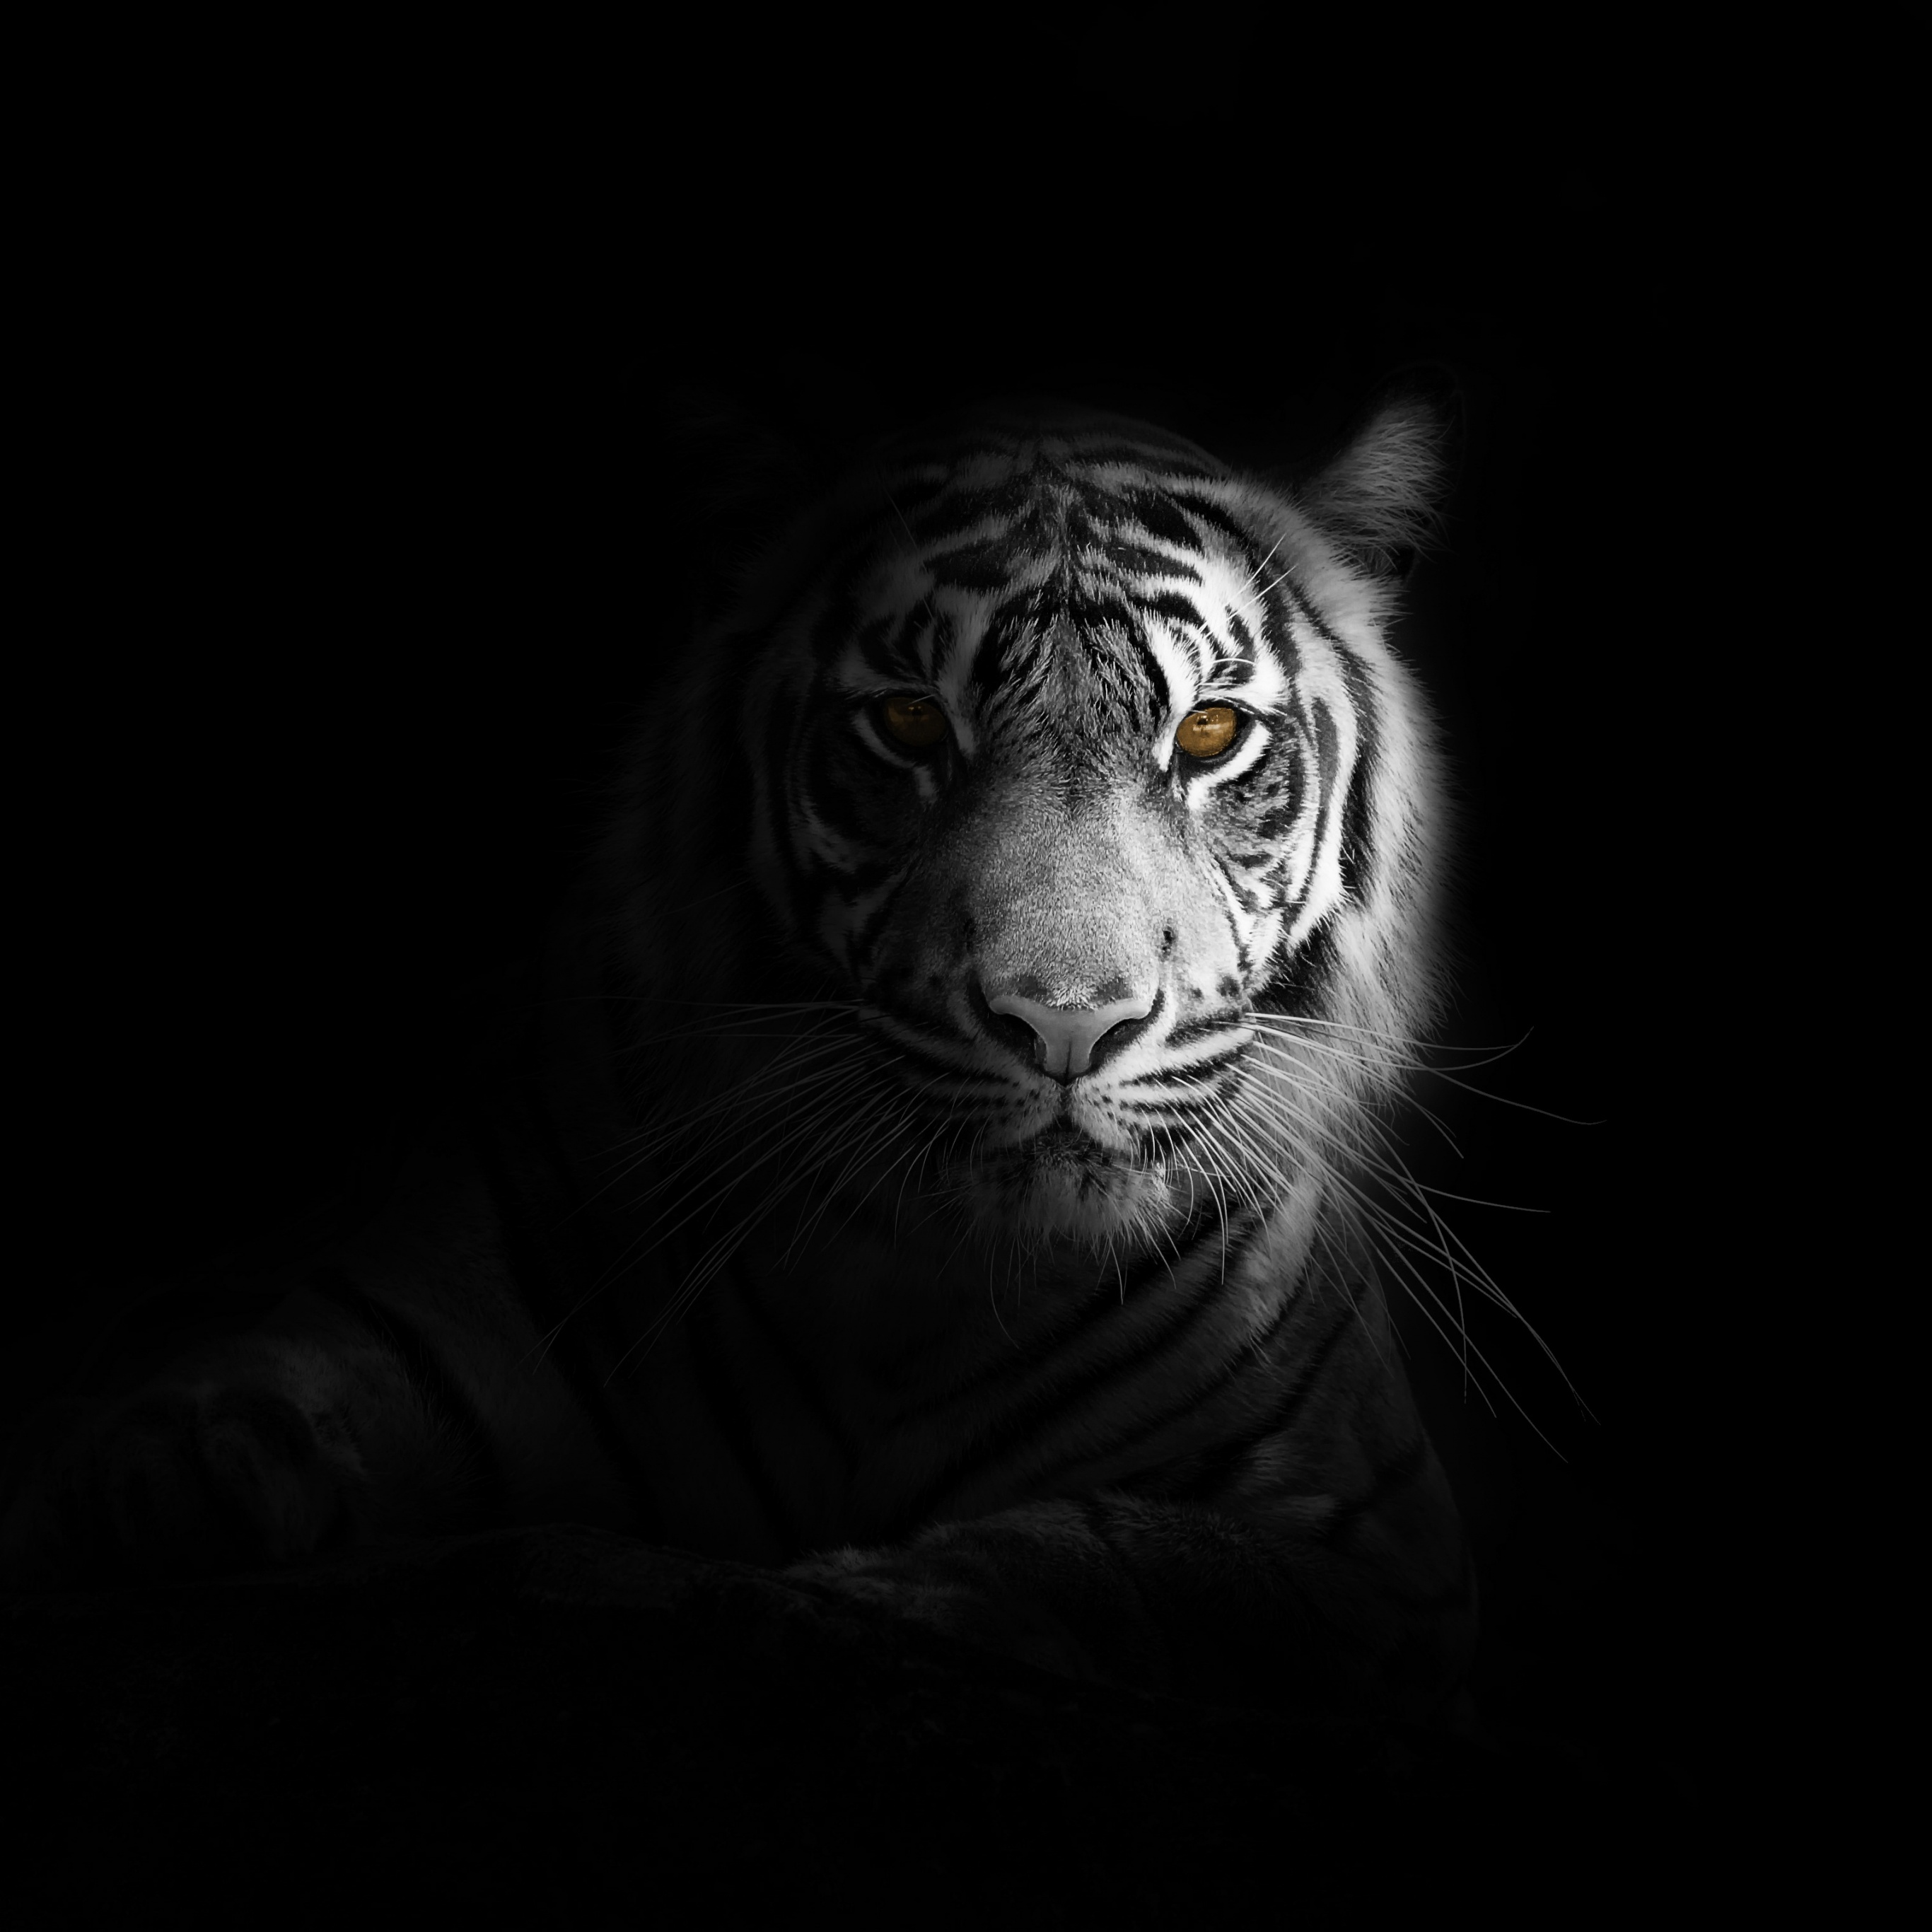 Collection 102+ Images tiger wallpaper black and white Excellent